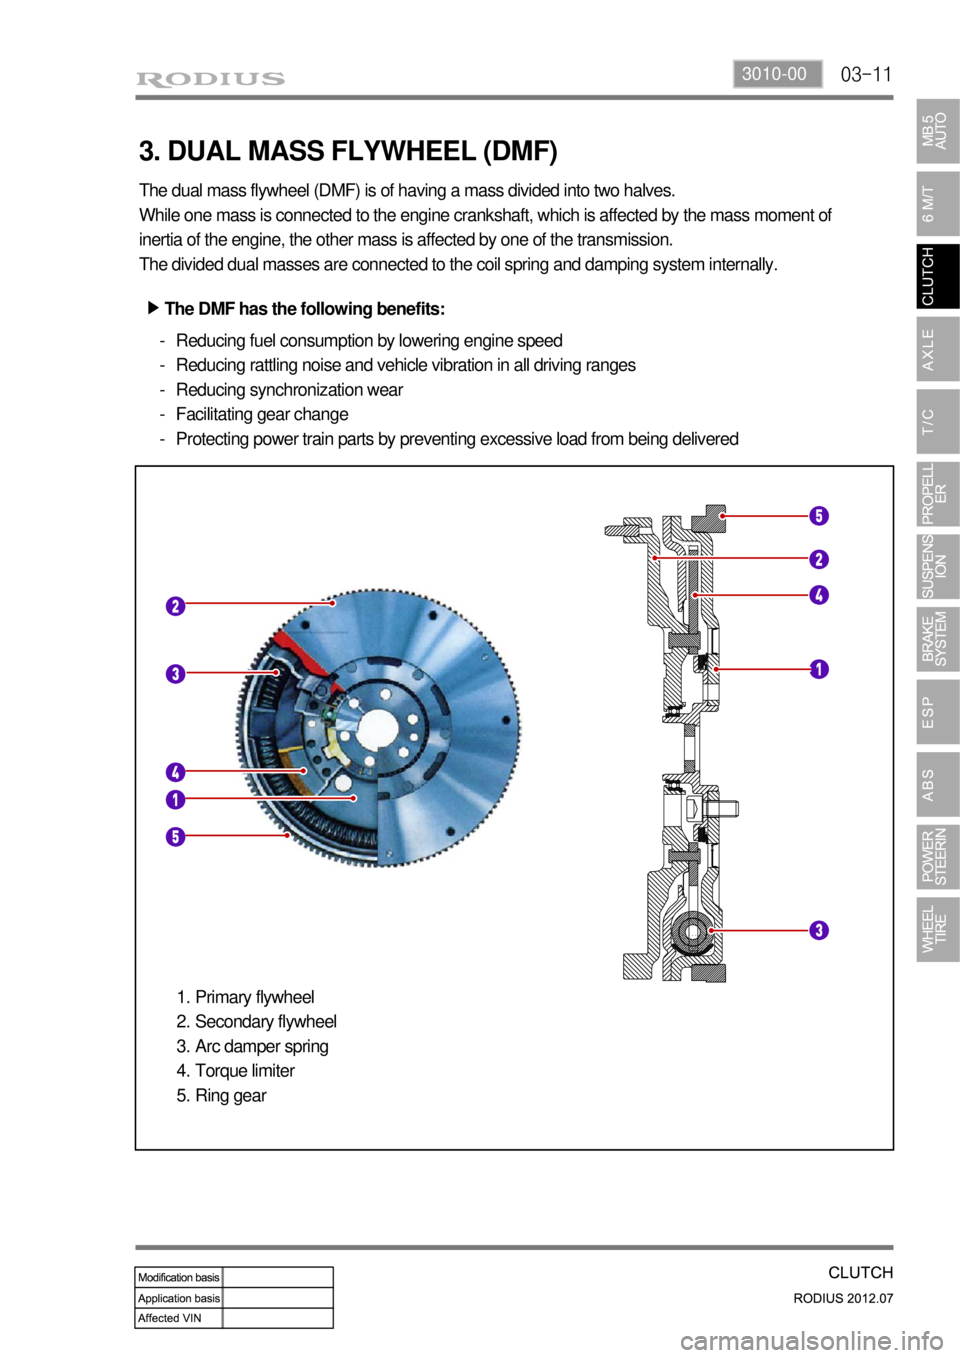 SSANGYONG RODIUS 2012  Service Manual 03-113010-00
3. DUAL MASS FLYWHEEL (DMF)
The dual mass flywheel (DMF) is of having a mass divided into two halves.
While one mass is connected to the engine crankshaft, which is affected by the mass m